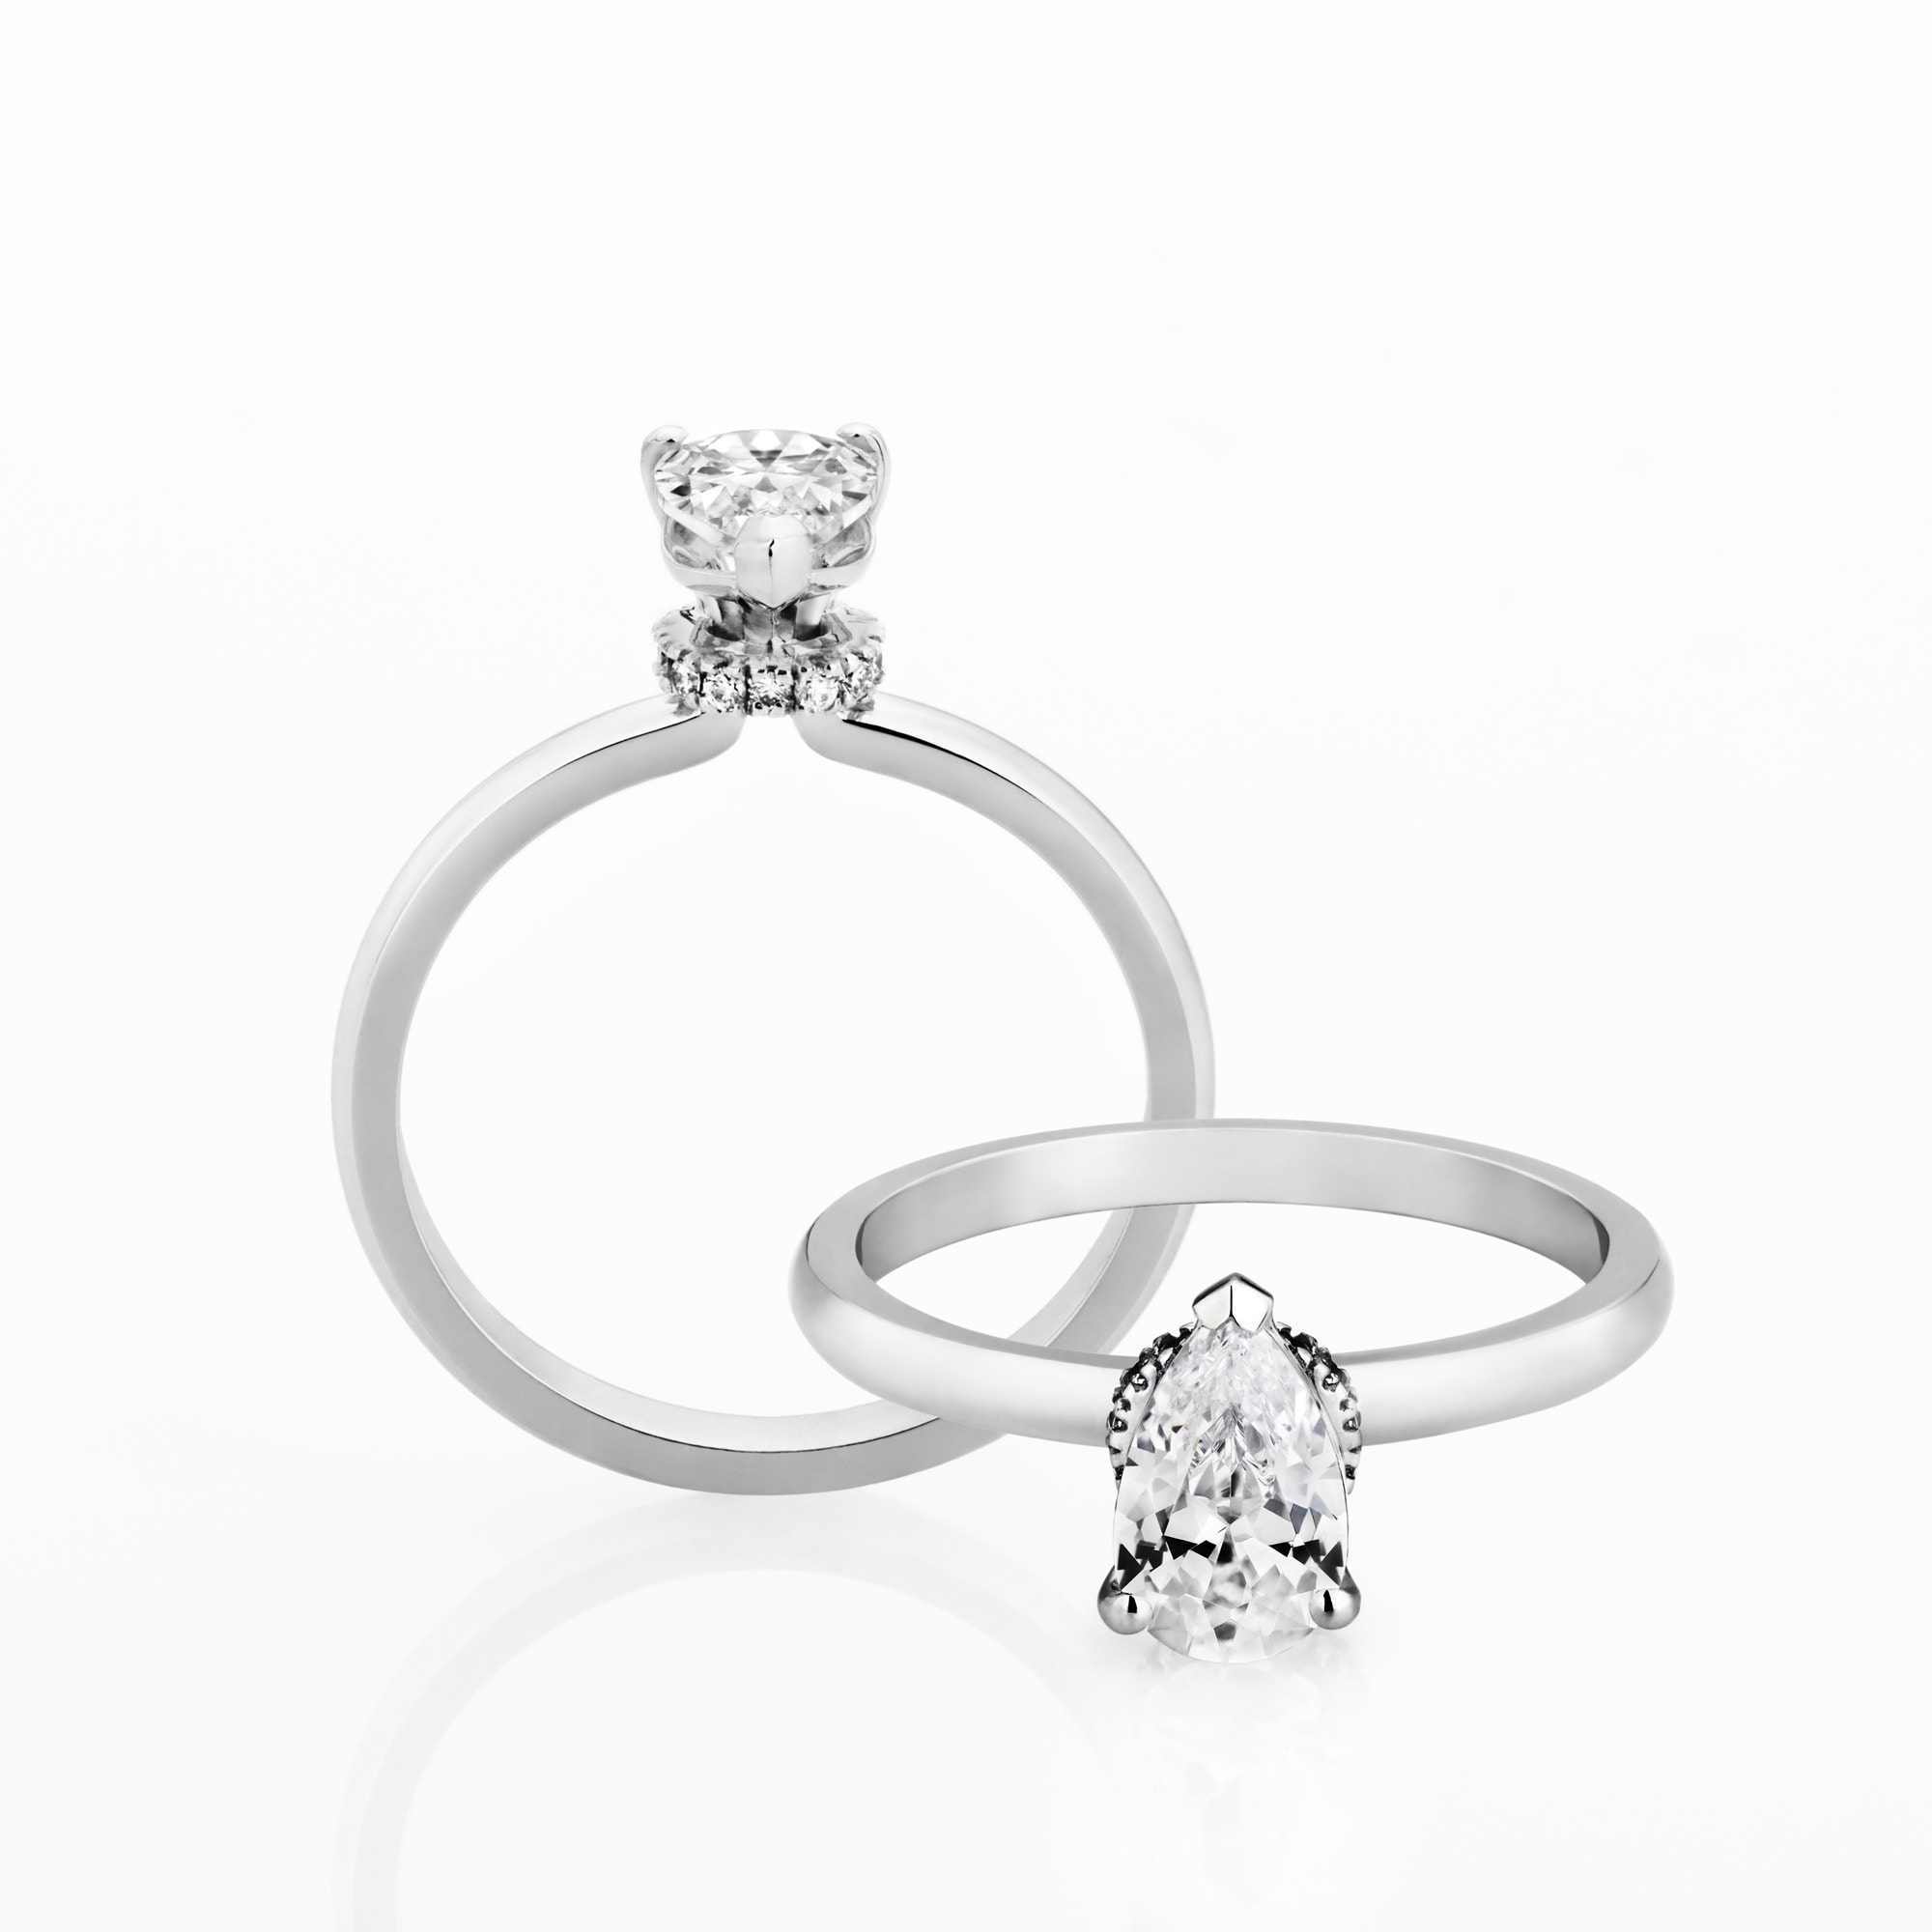 Orion diamond solitaire ring